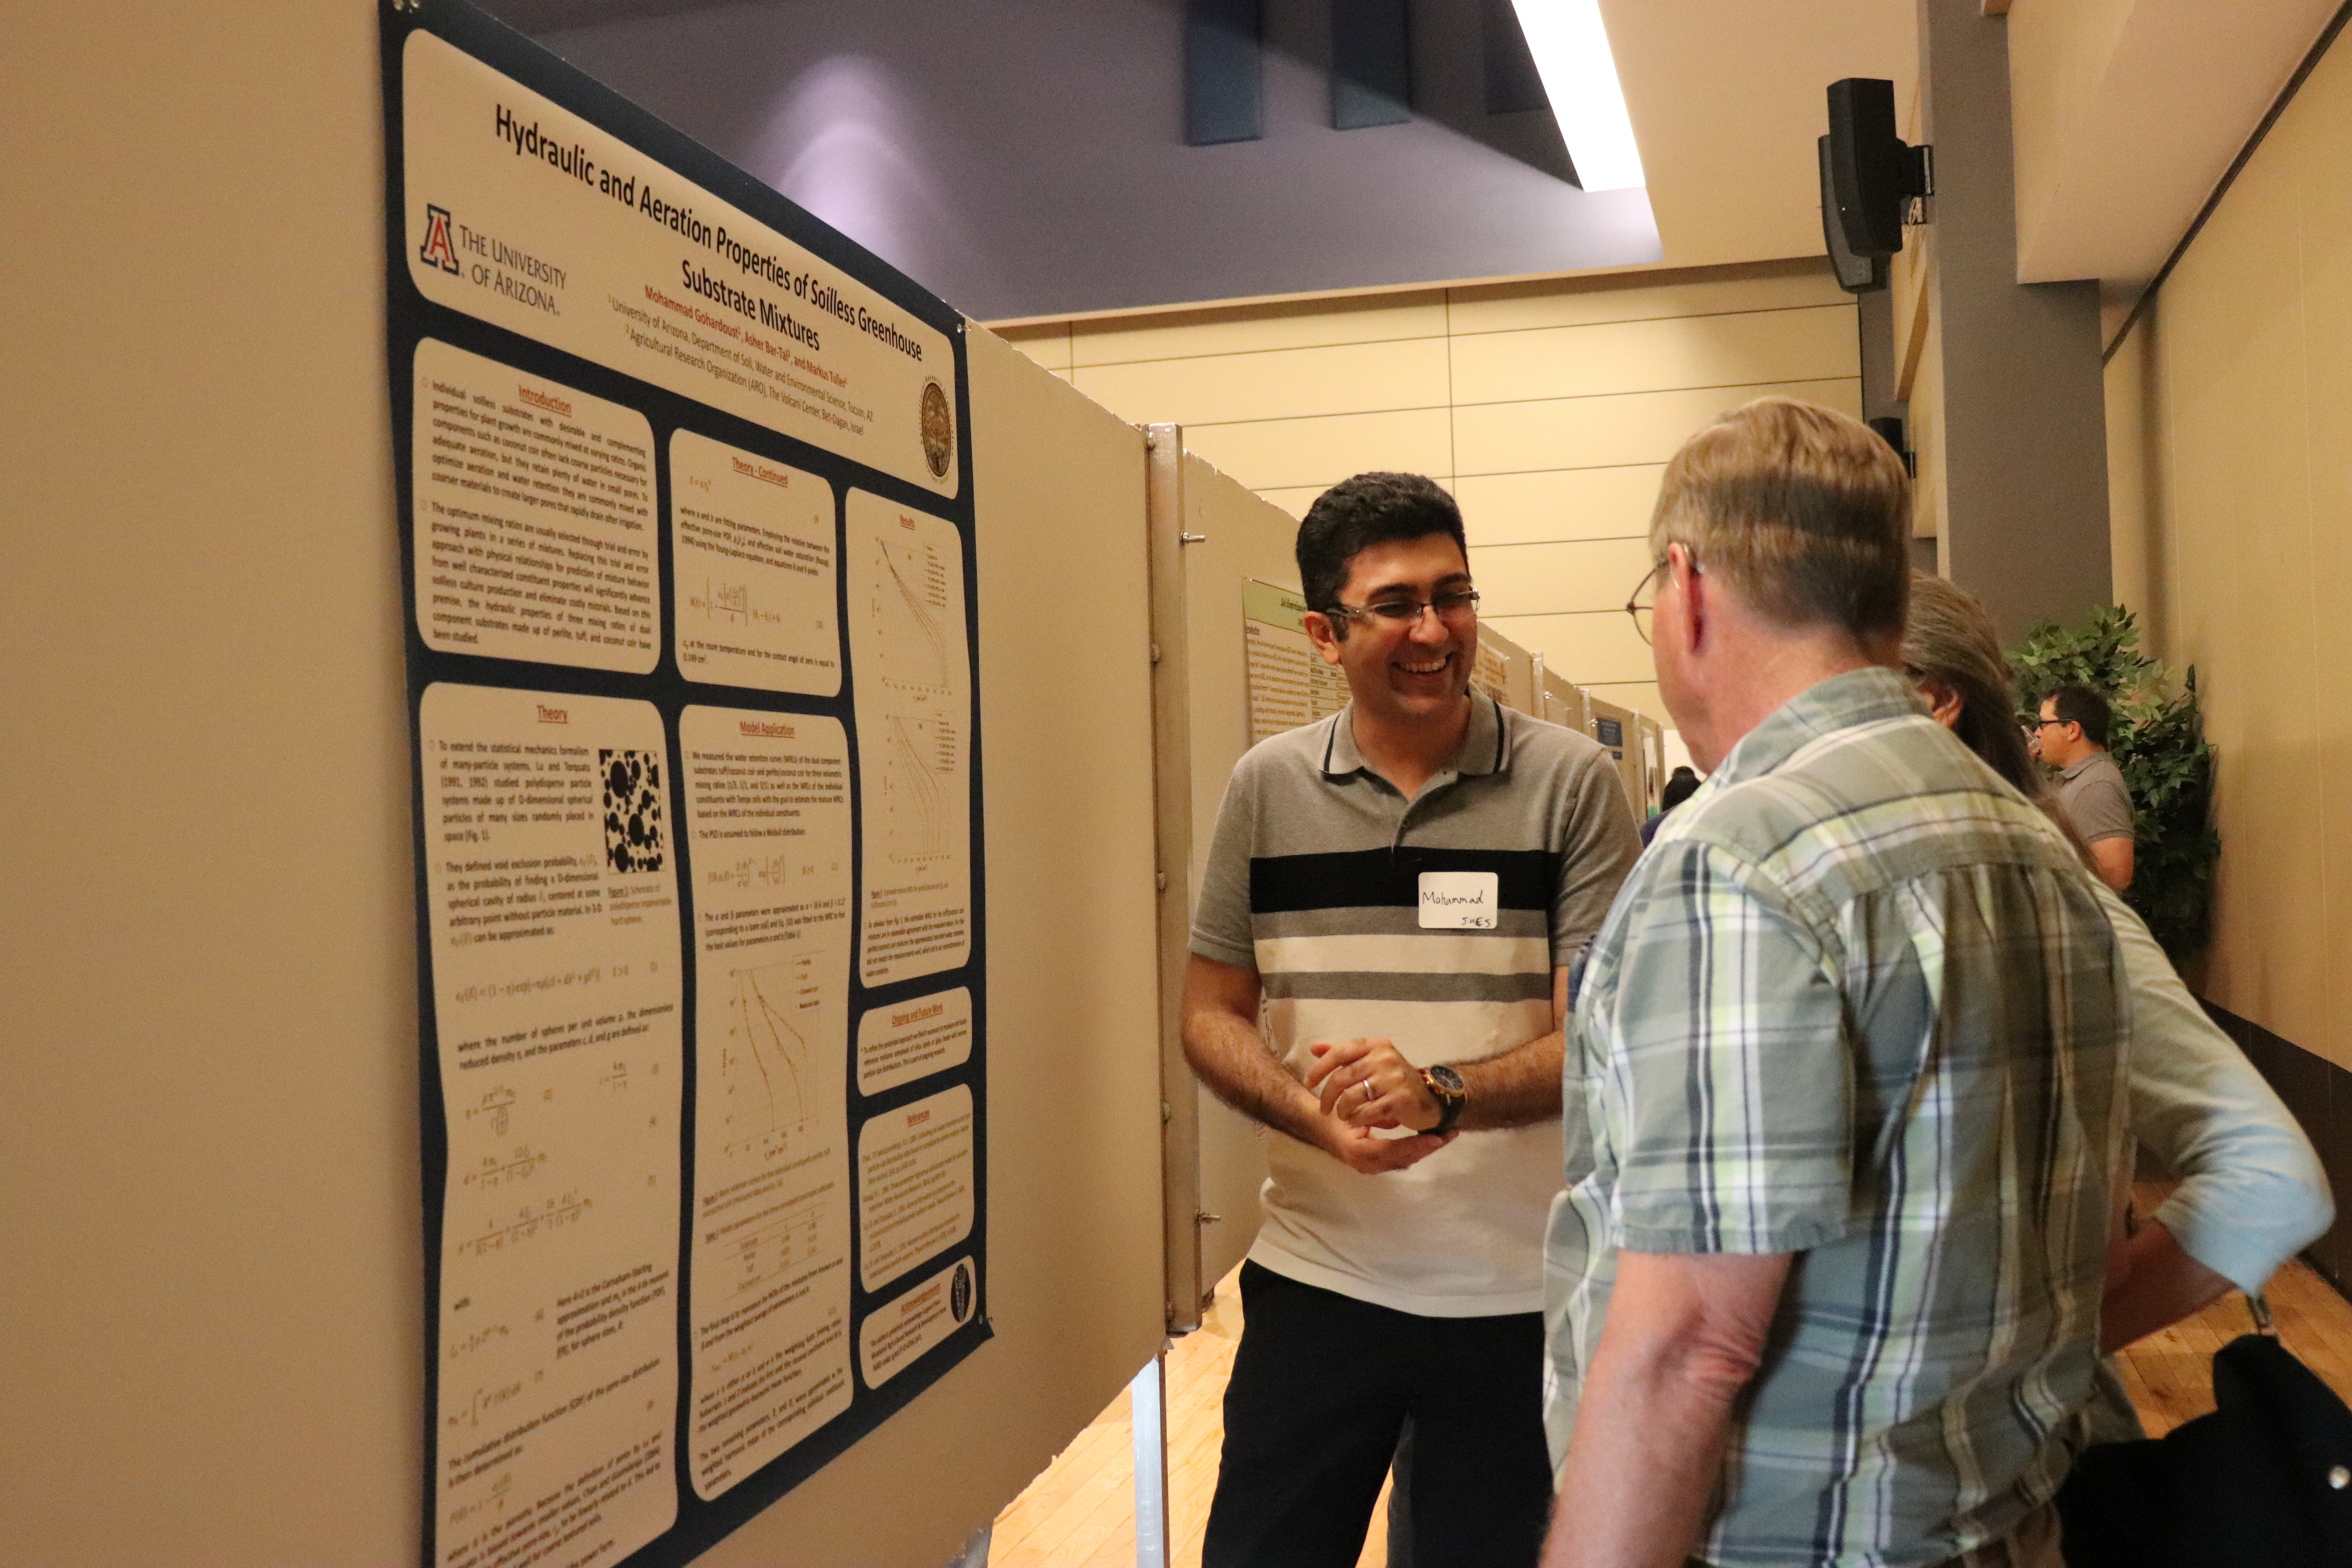 Students learn how to communicate their research at SWESx poster session